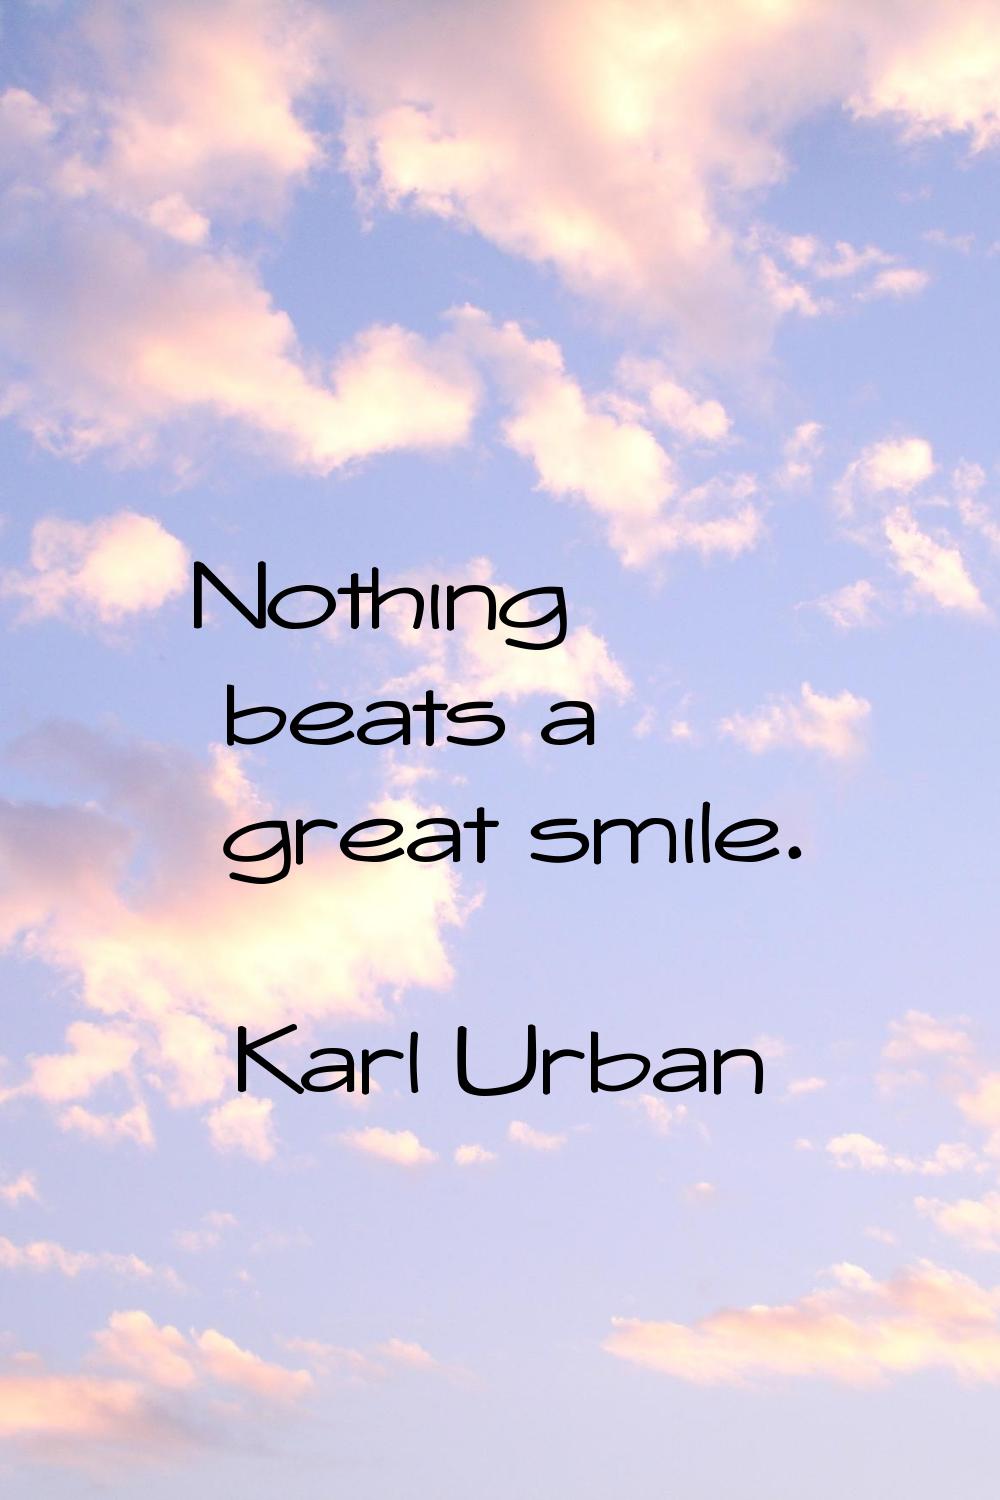 Nothing beats a great smile.